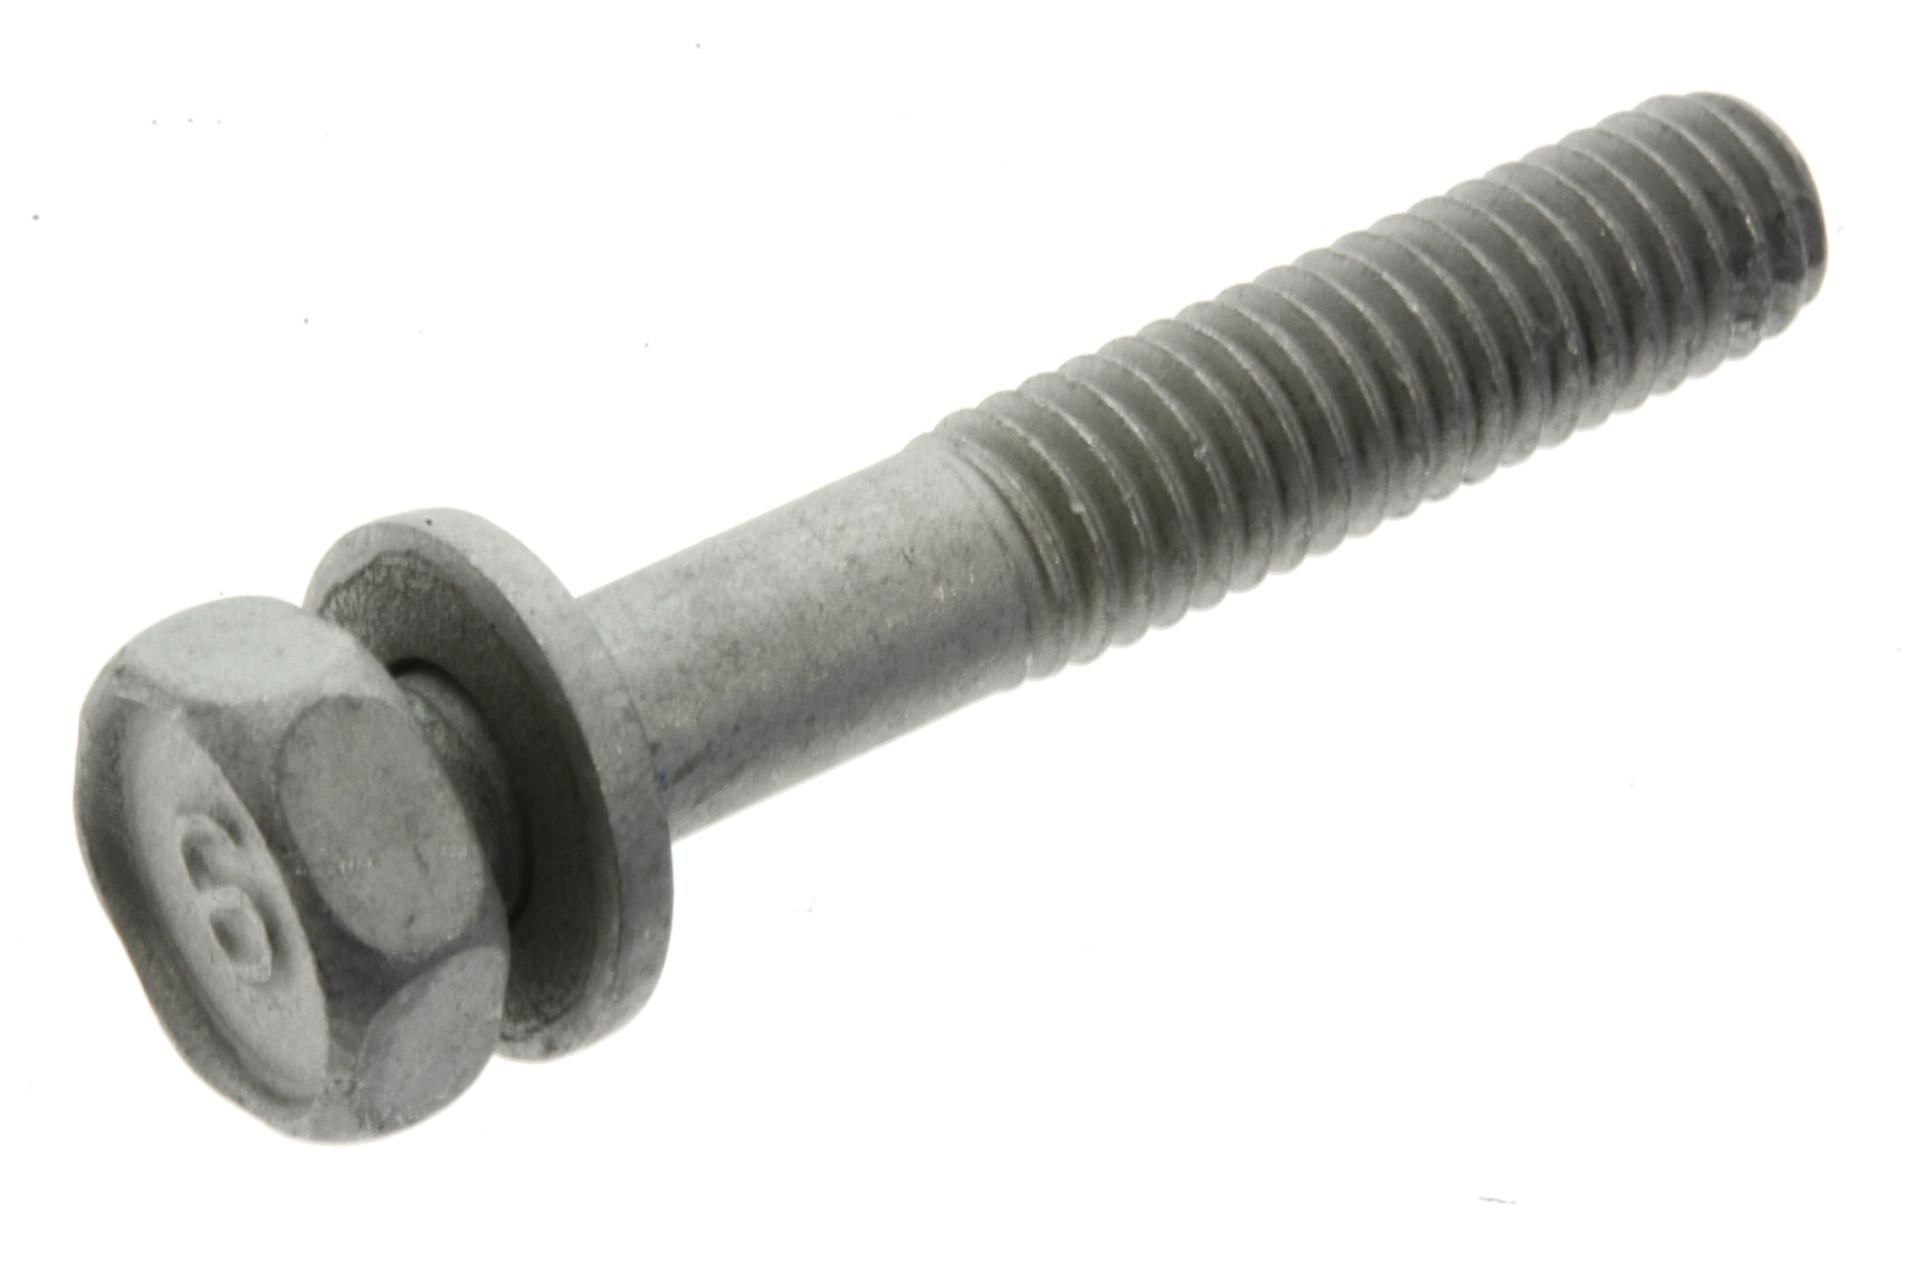 97595-06535-00 BOLT, WITH WASHER